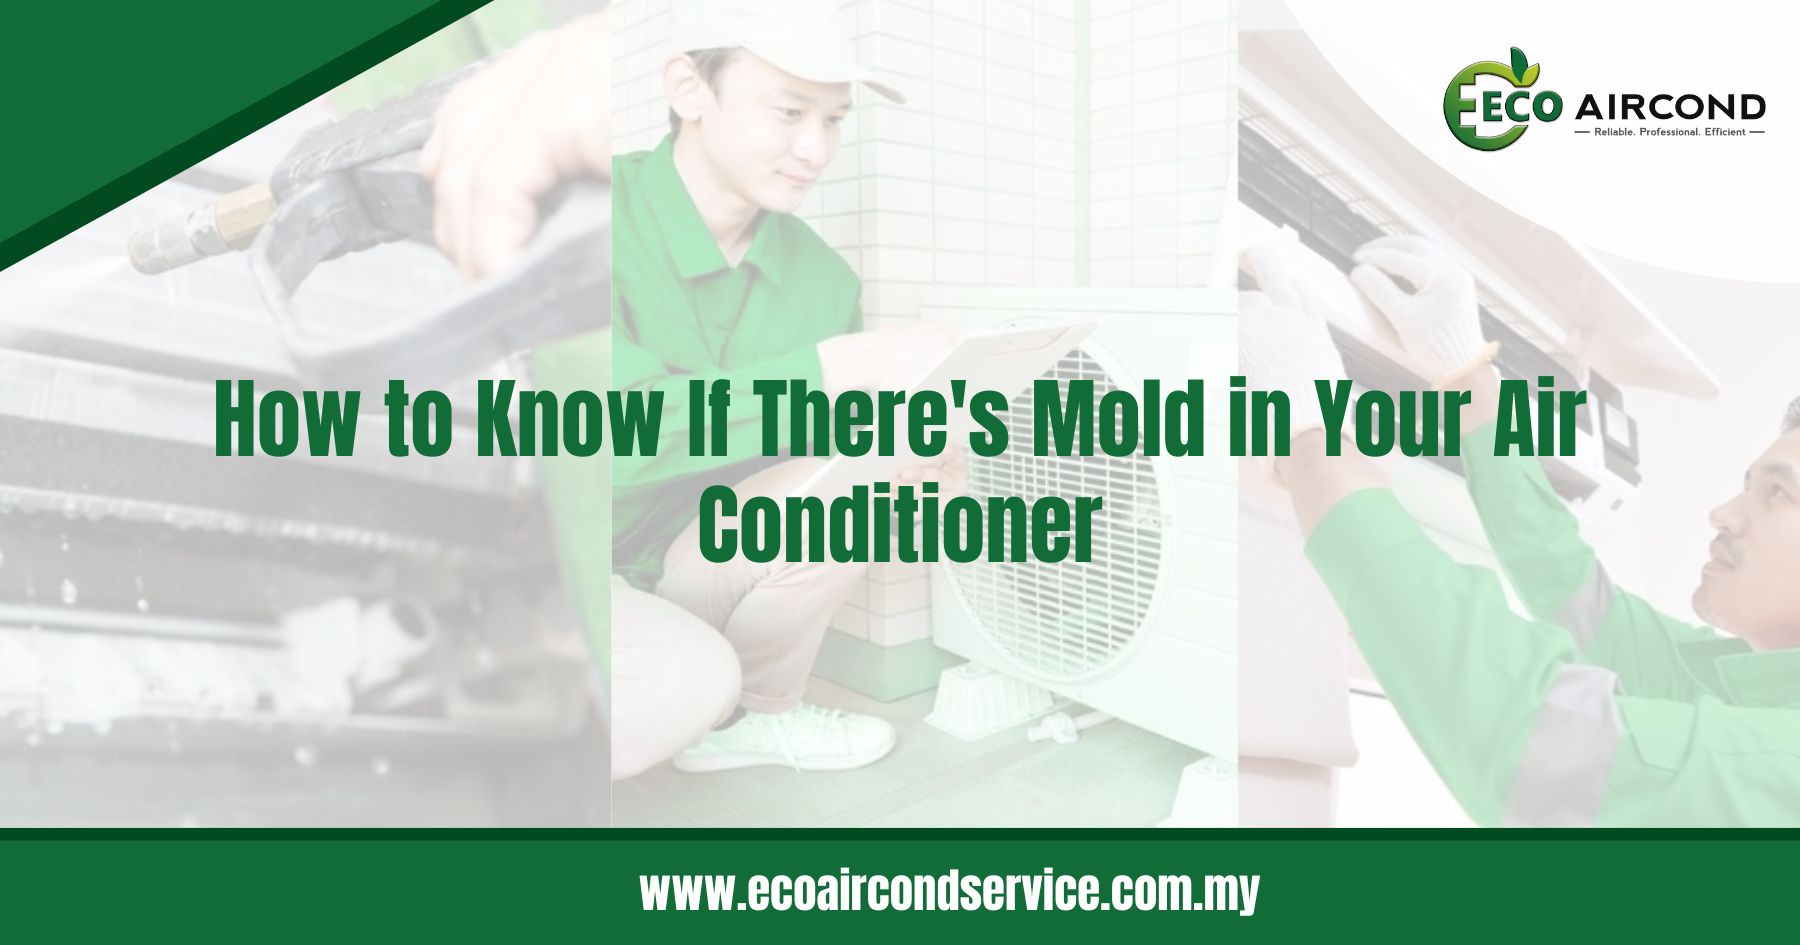 How to Know If There's Mold in Your Air Conditioner